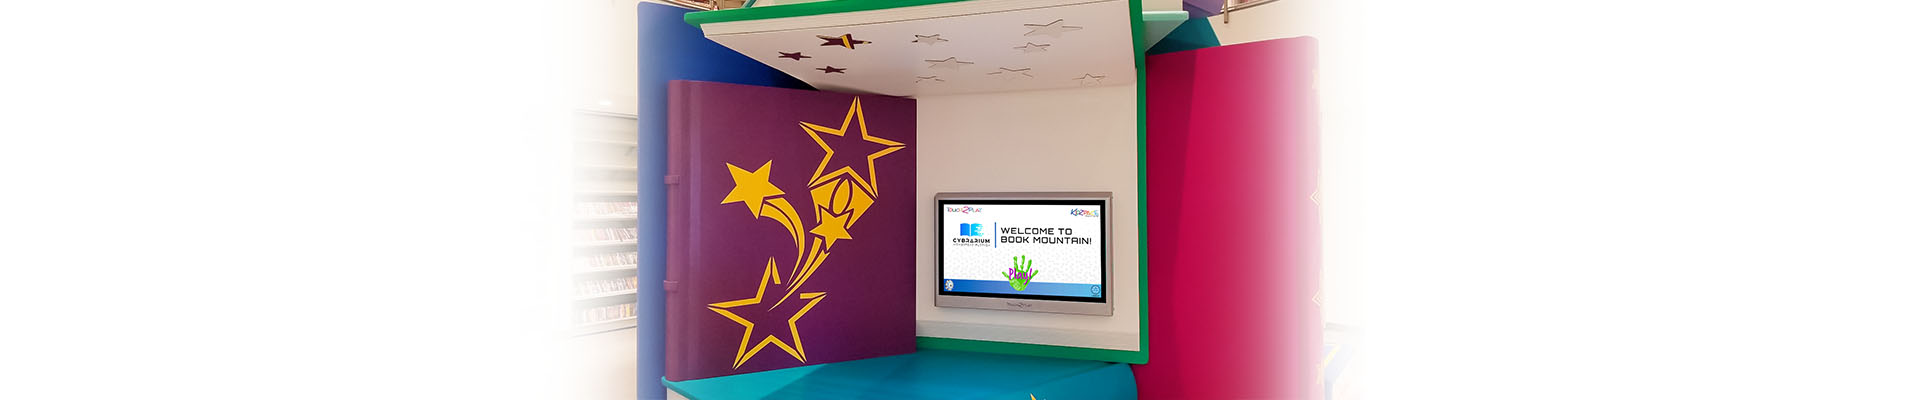 Touch2Play Junior Wall interactive touchscreen play wall designed for young children